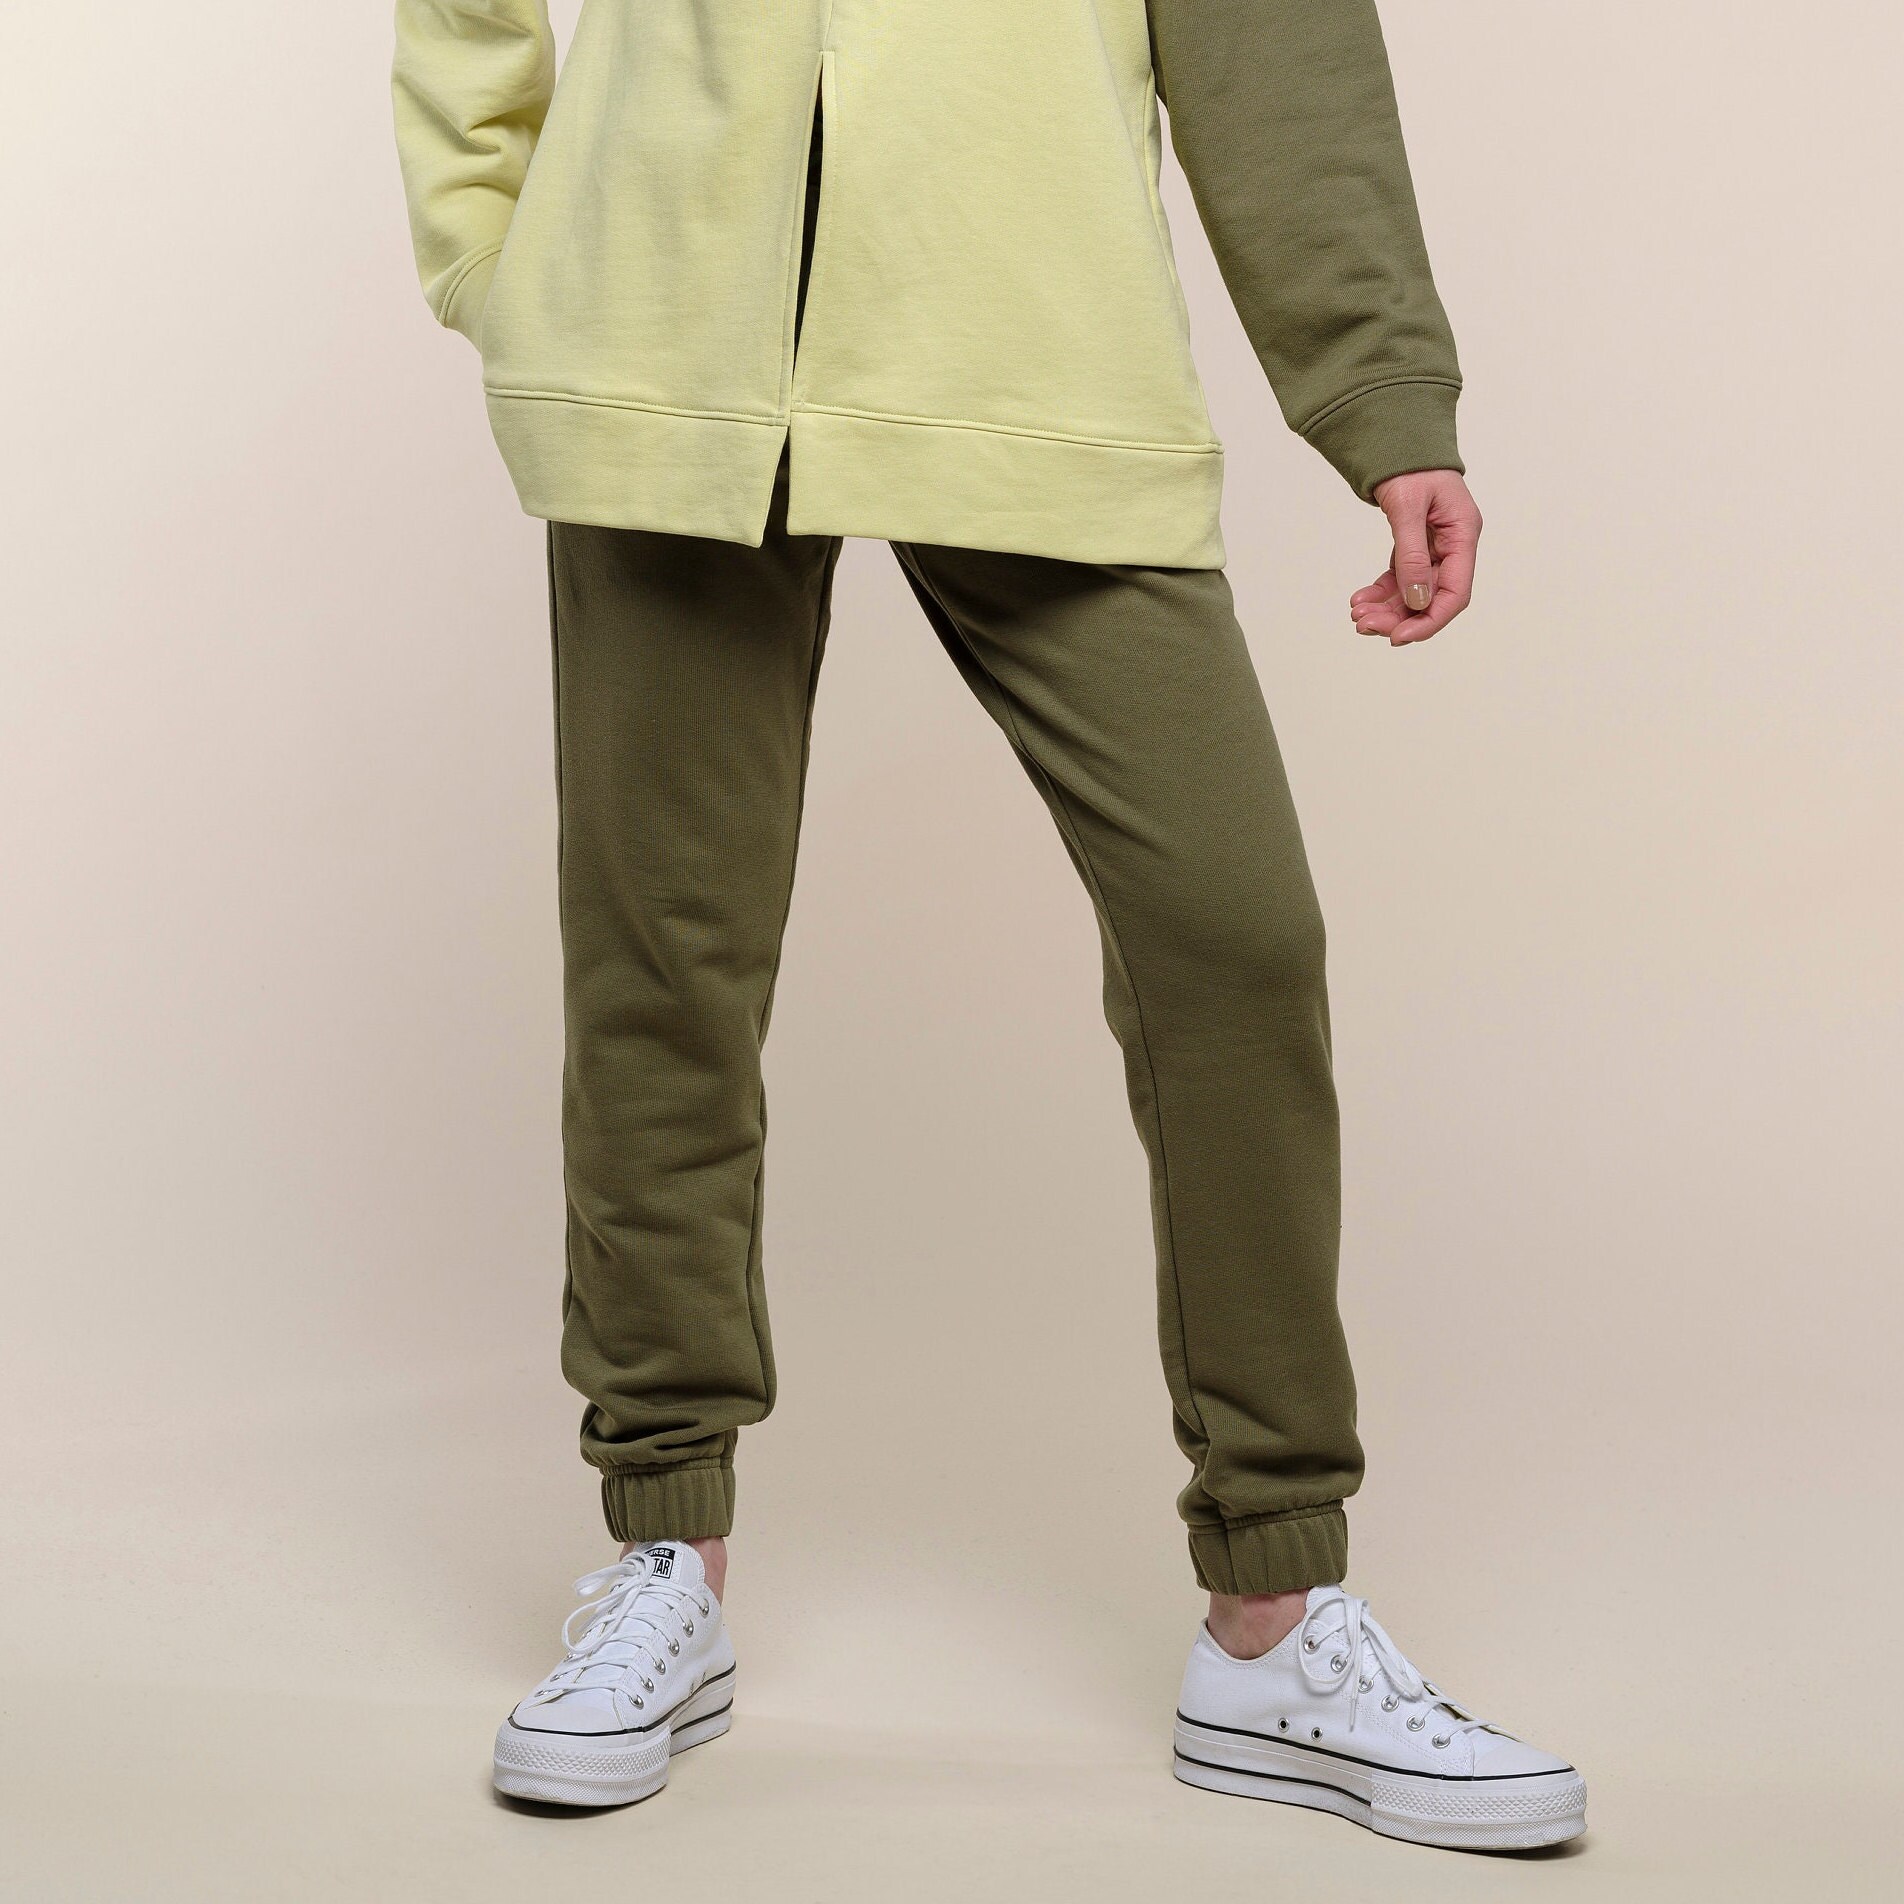 Cotton Green Joggers Olive Green Jogging Pants Green Sweatpants Elastic  Cuff Sweatpants Sustainable Athleisure Comfy Sweatpants 